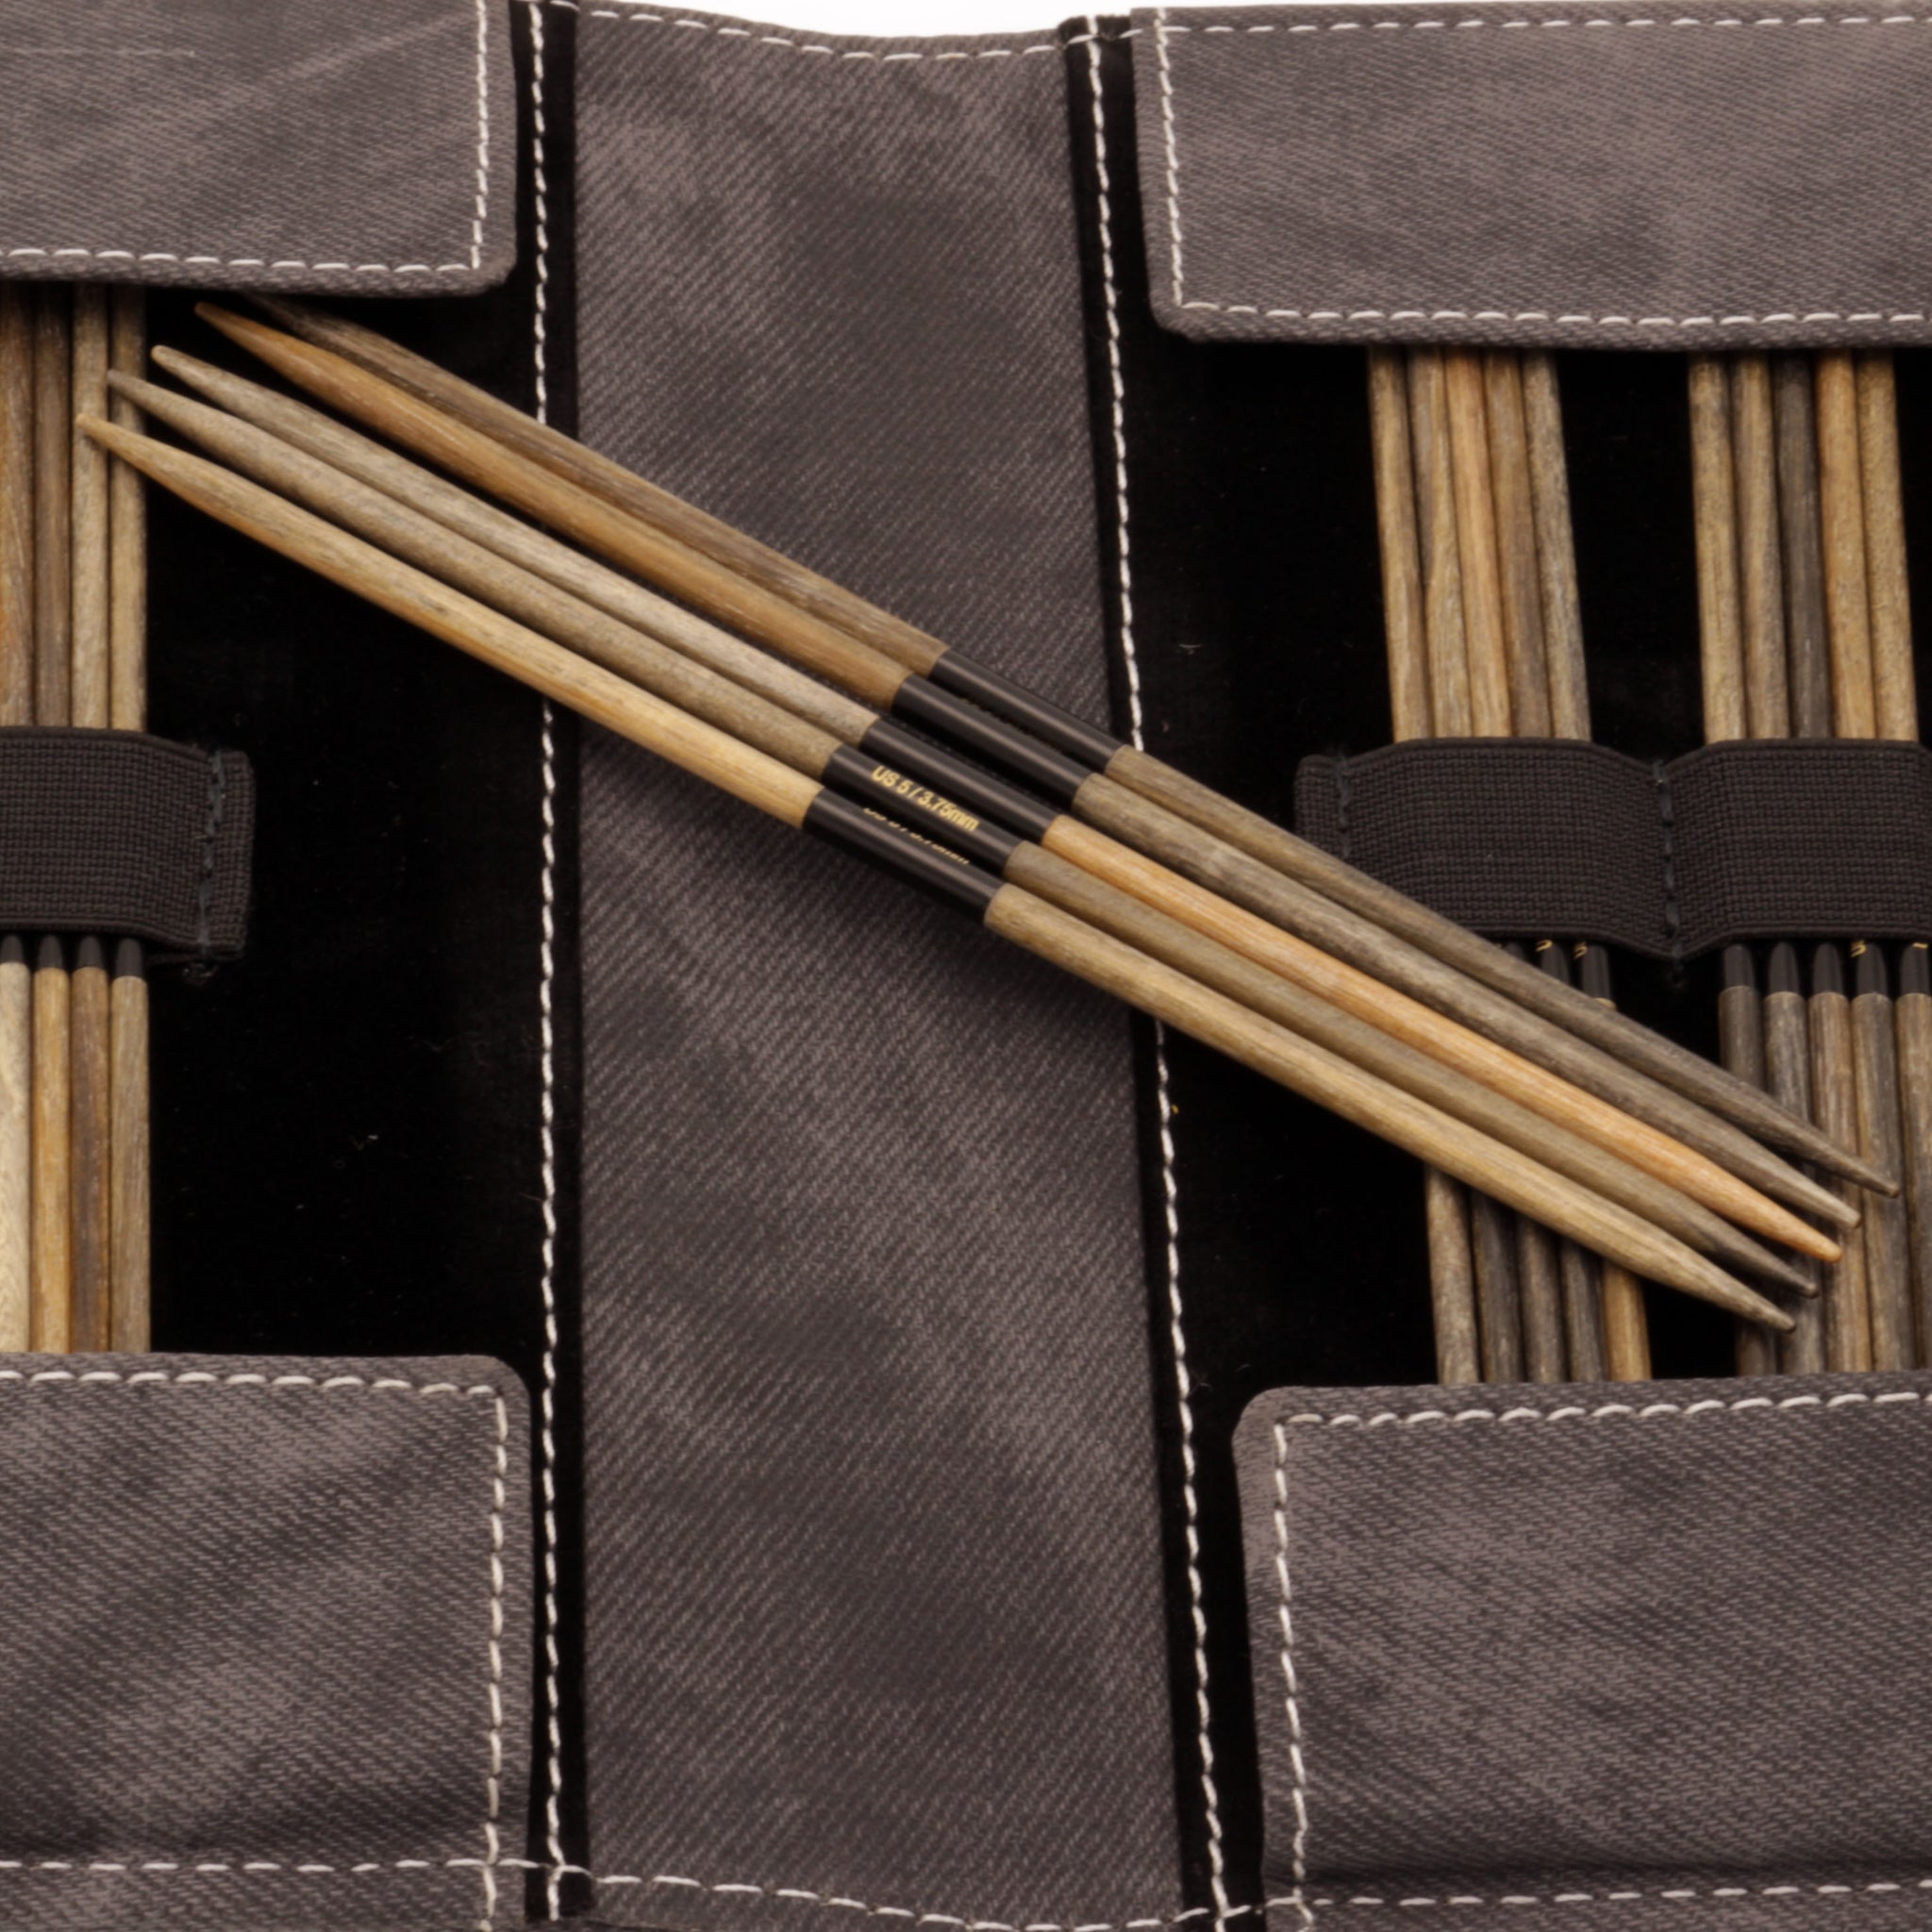 Double-pointed knitting needles set natural